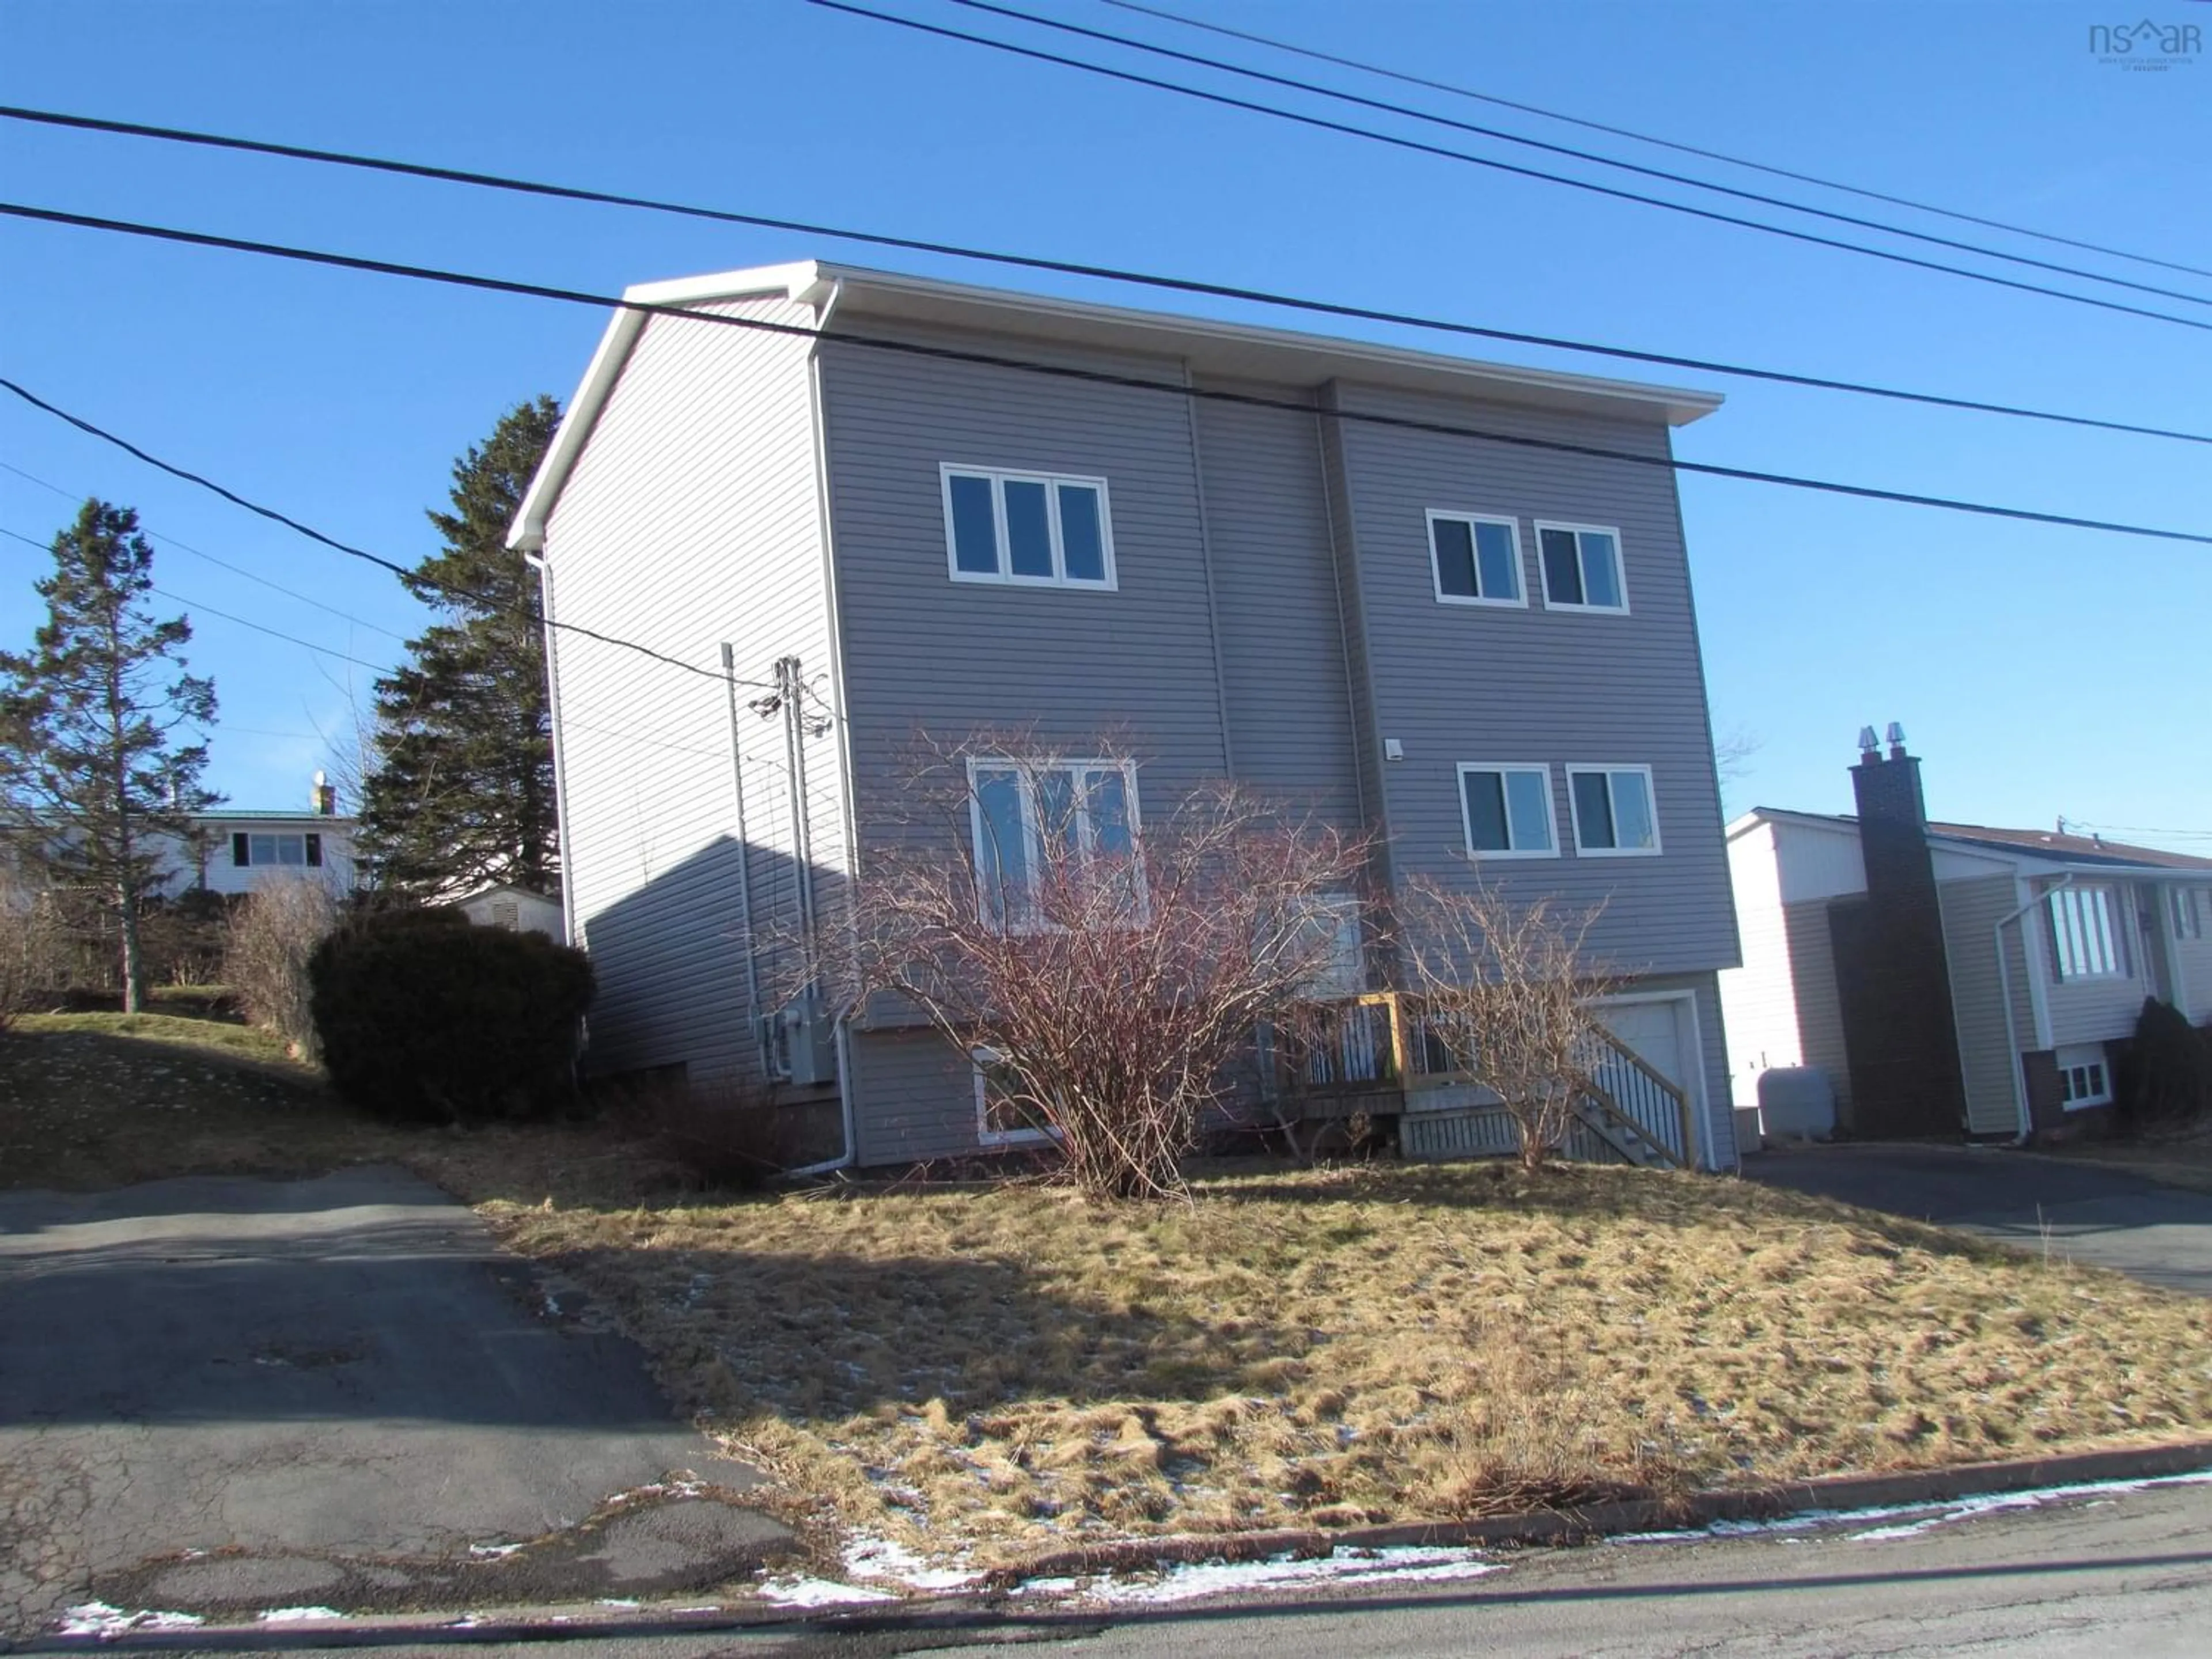 Home with unknown exterior material for 103 Sirius Cres, Cole Harbour Nova Scotia B2W 4L4